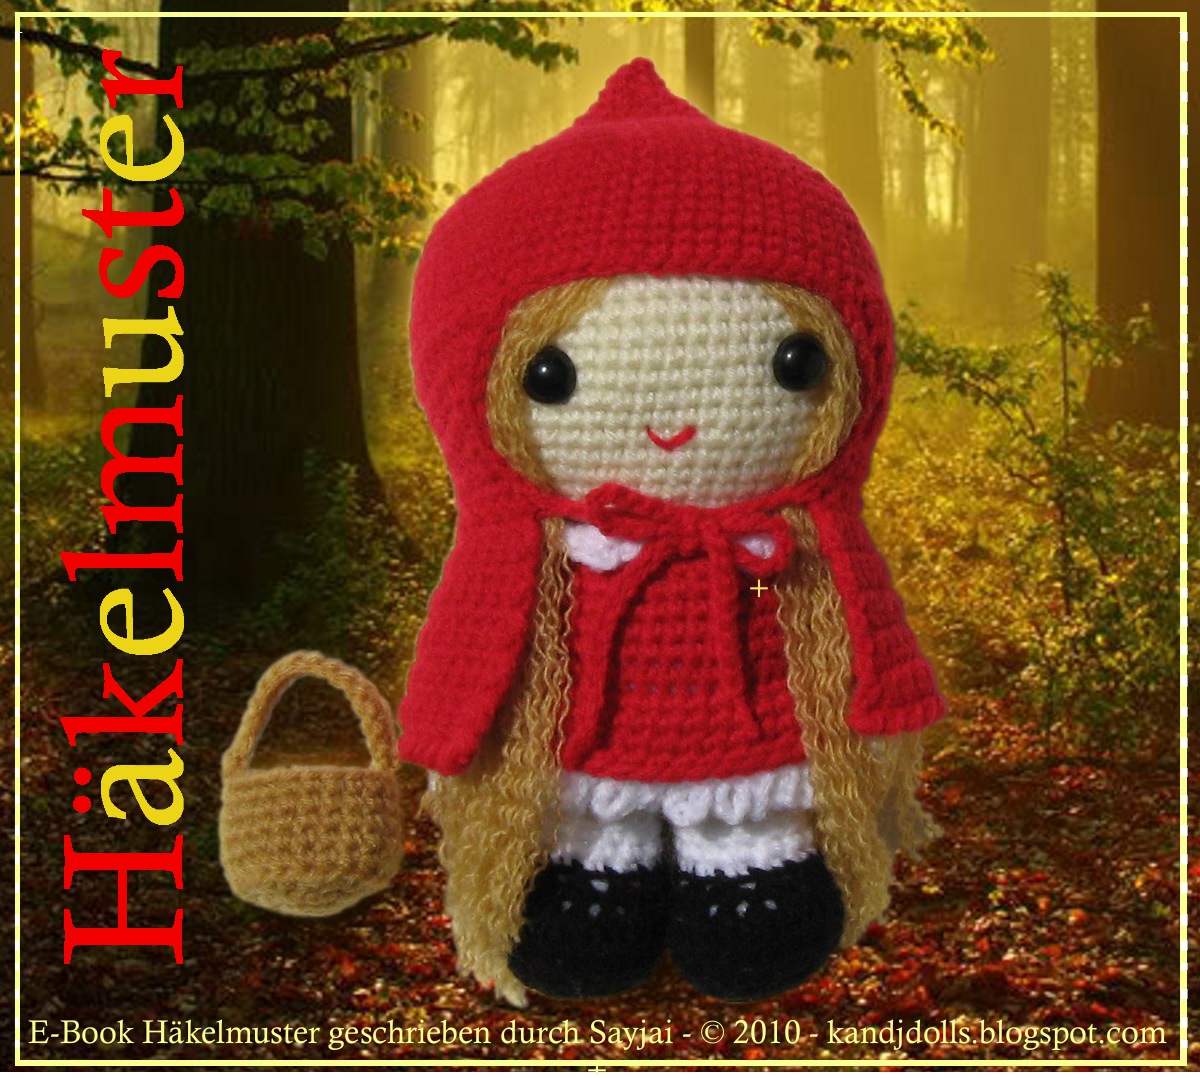 Vintage Fairytale Little Red Riding Hood Free Knitting Pattern